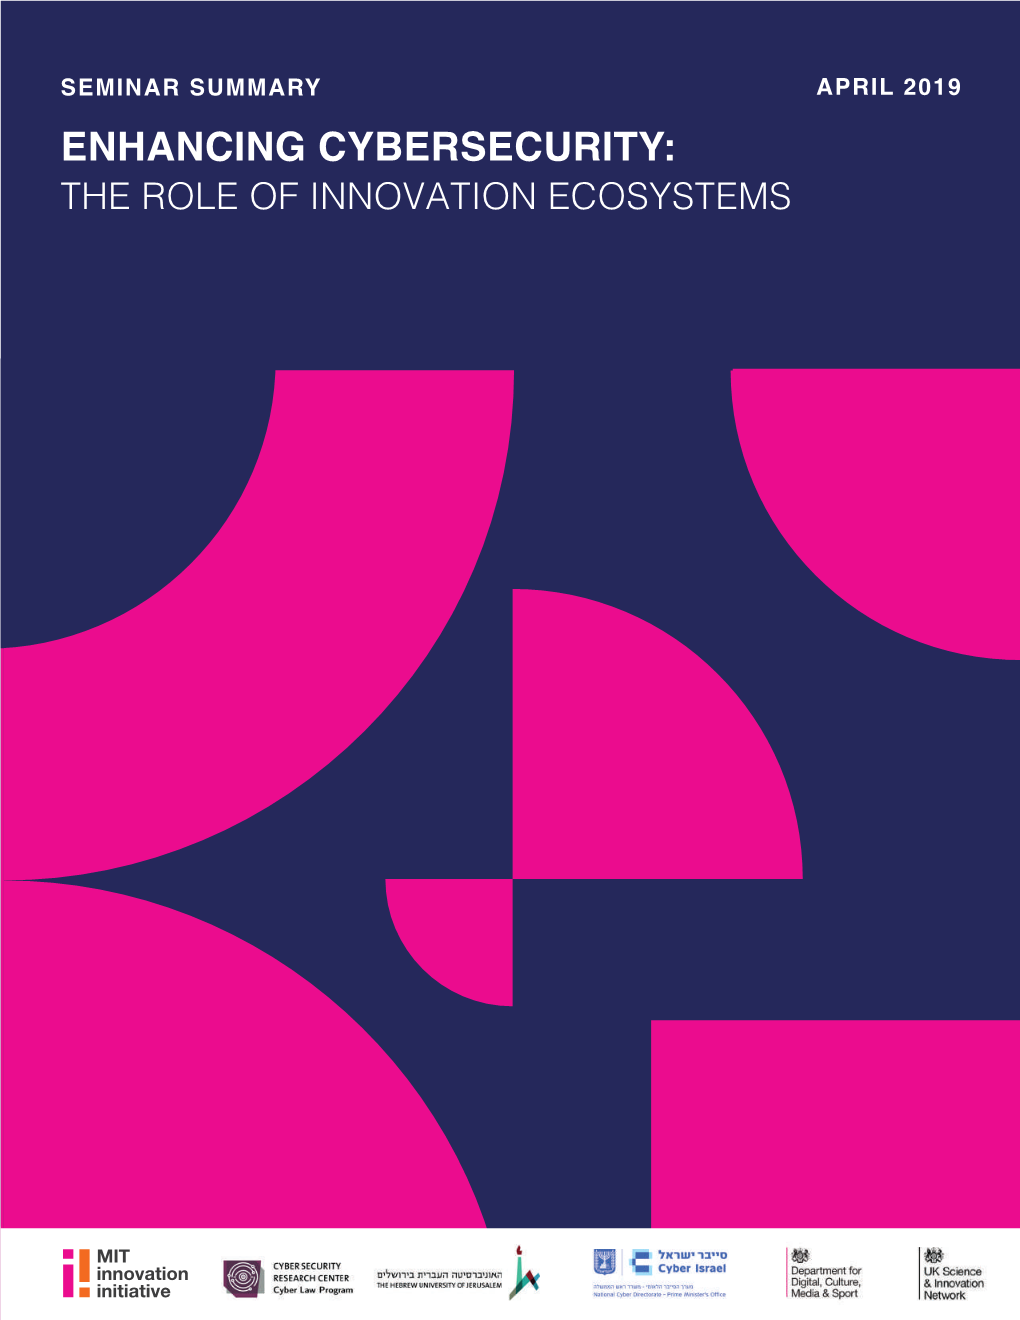 Enhancing Cybersecurity: the Role of Innovation Ecosystems